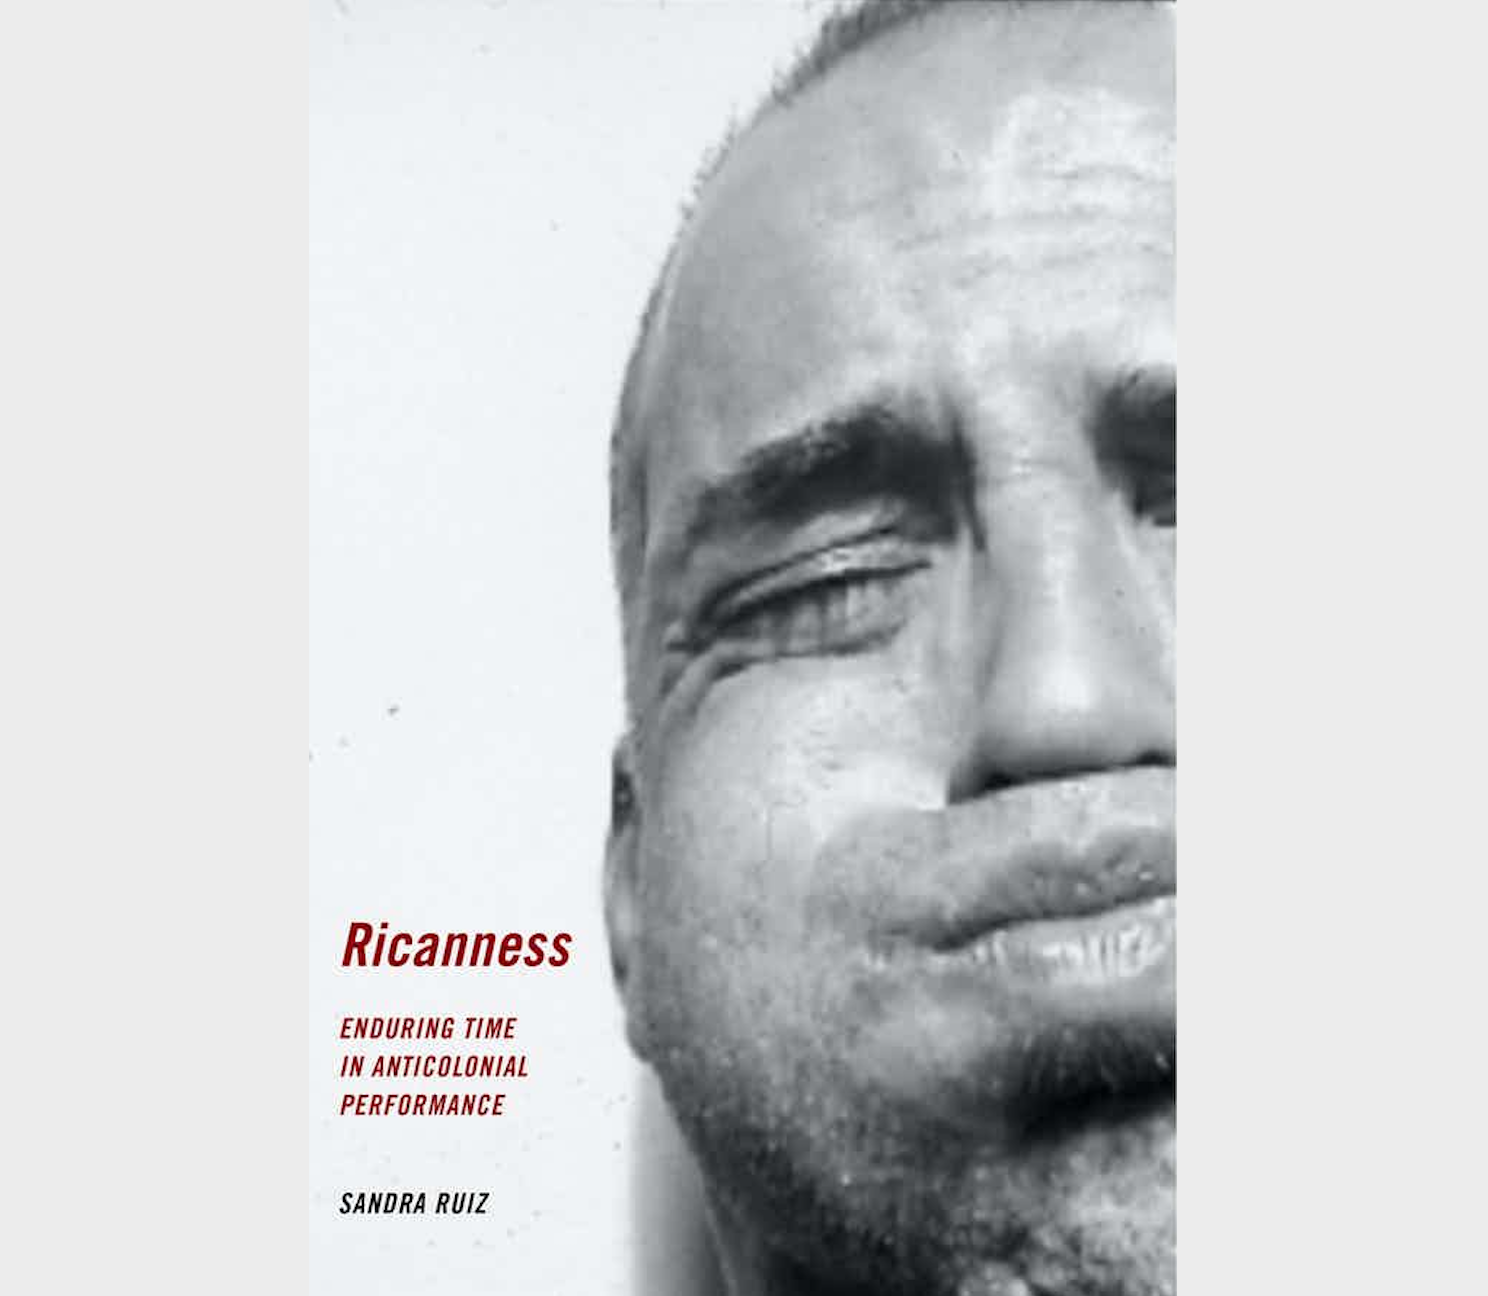 The Politics of Aesthetics in Anticolonial Thought: A Review of Ricanness: Enduring Time in Anticolonial Performance by Sandra Ruiz